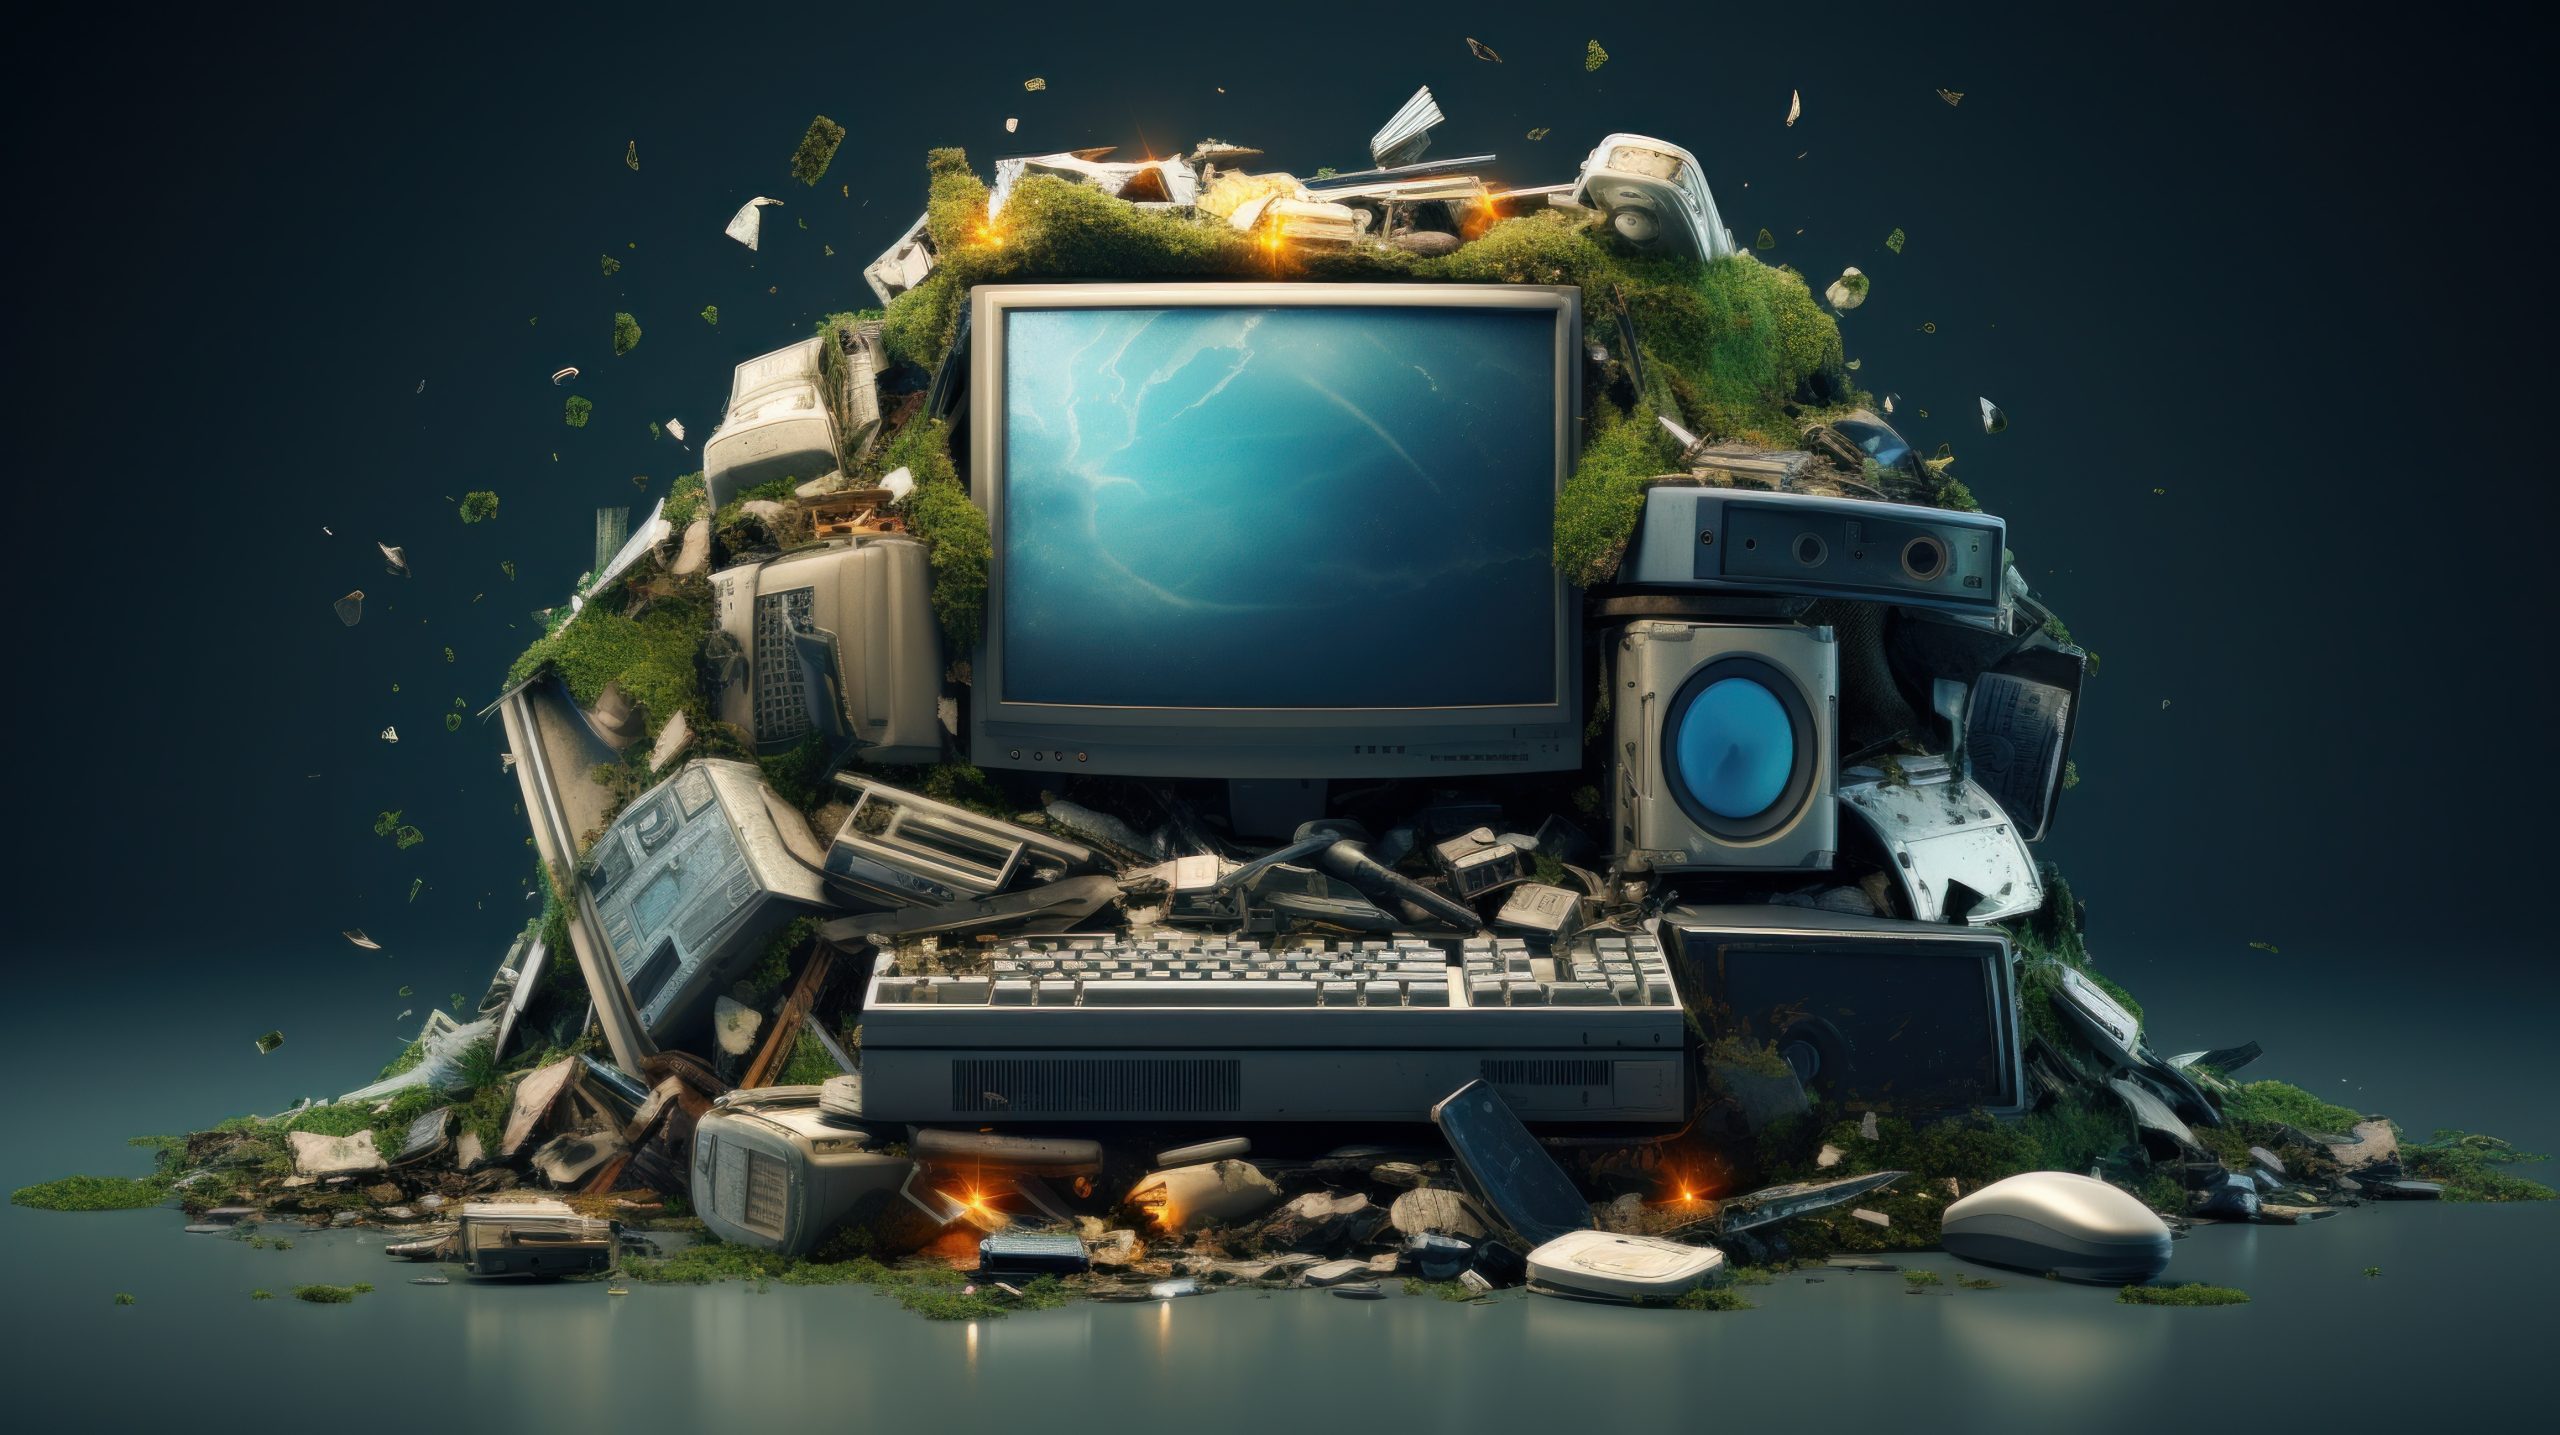 Outdated non-working computer littered with various electronic and household waste. Used equipment requires proper recycling and disposal to maintain ecological balance. Earth Day, ecology concept